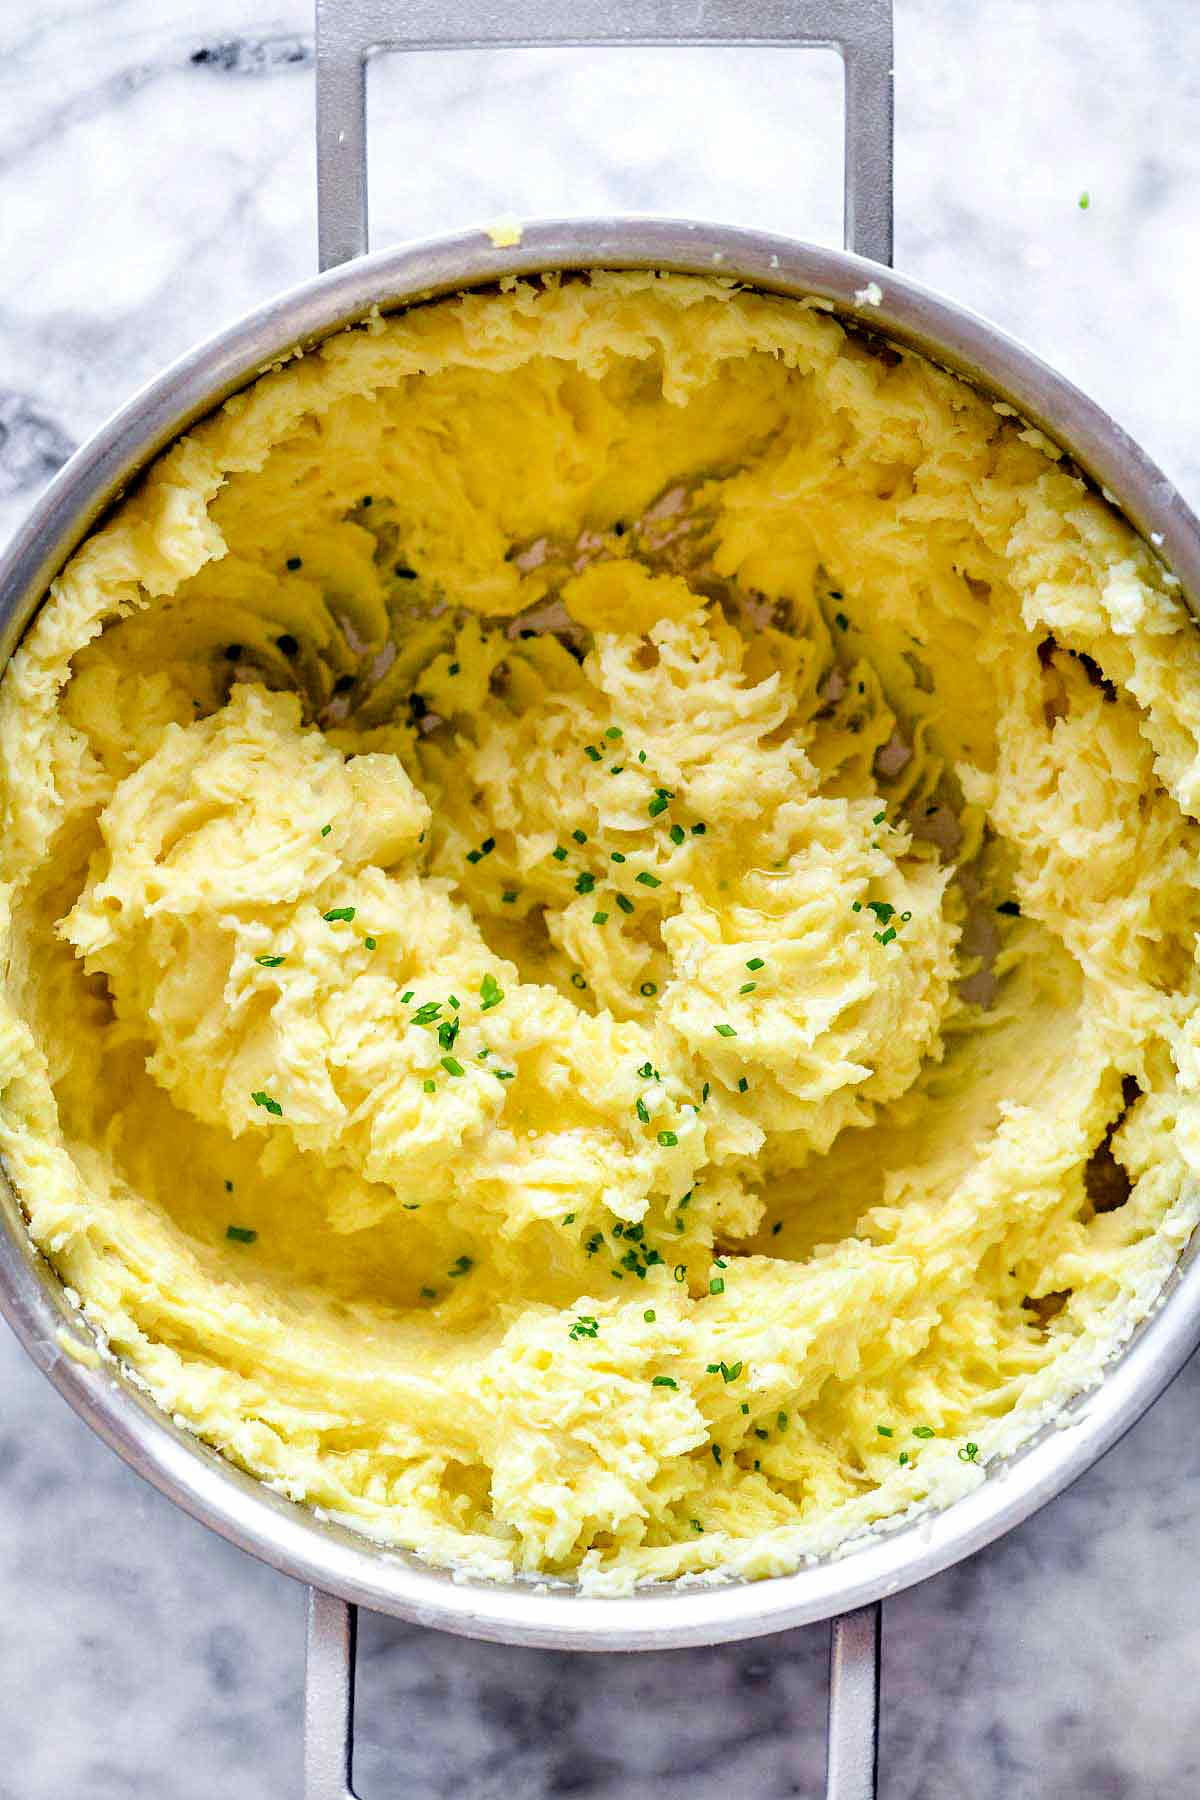 Reheating Mashed Potatoes In Microwave
 Creamy Mashed Potatoes Recipe The BEST